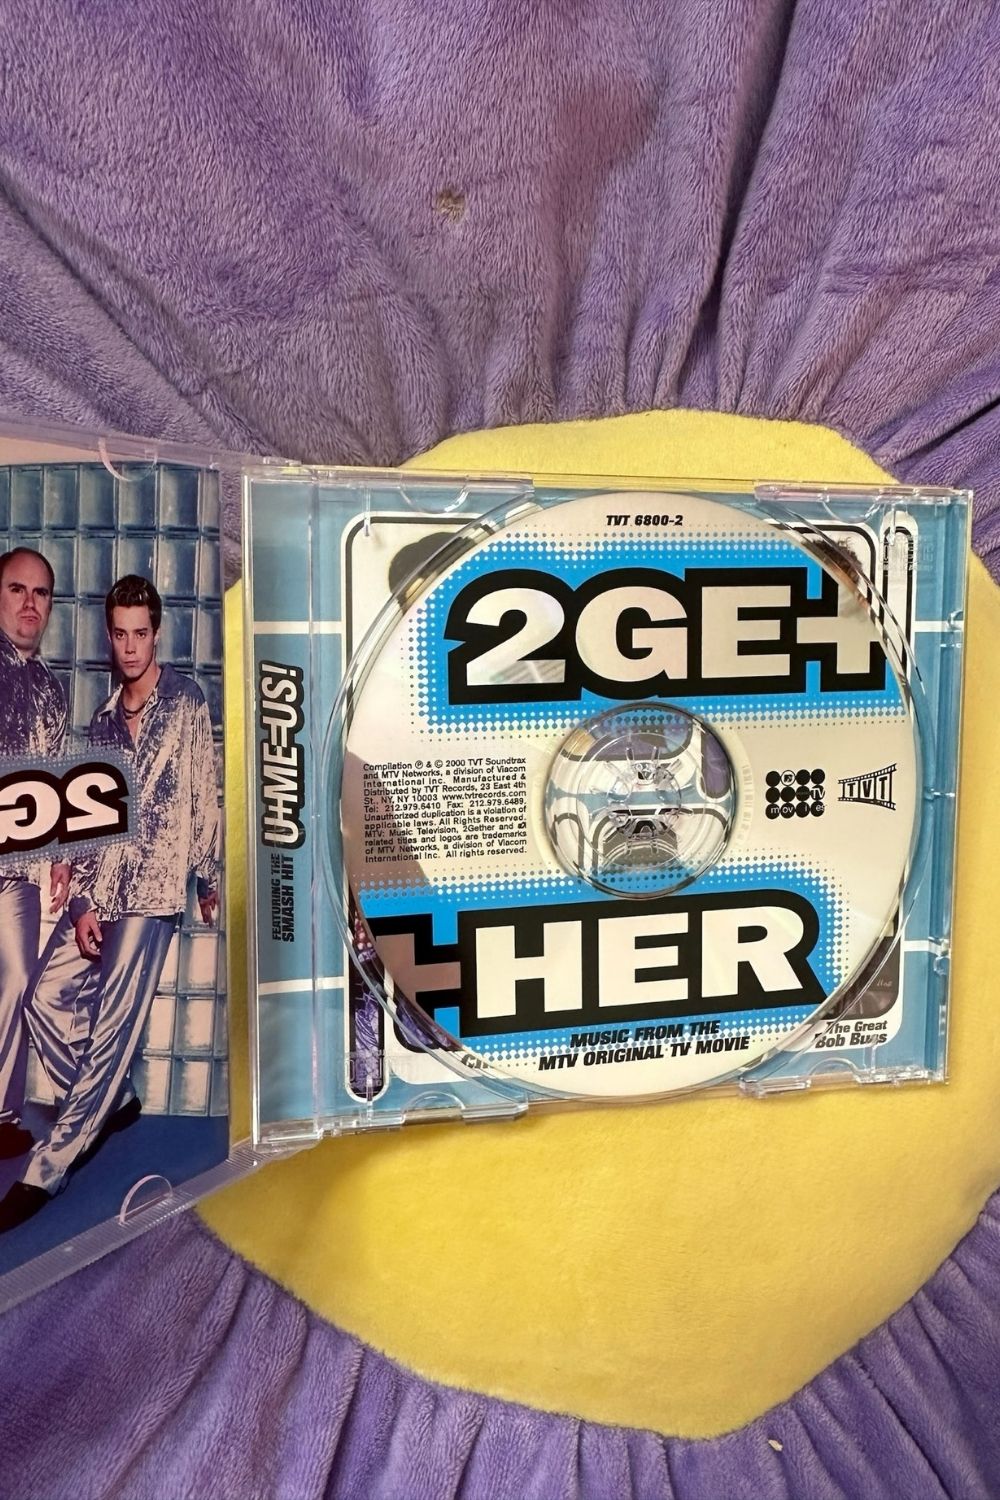 2GE+HER CD*